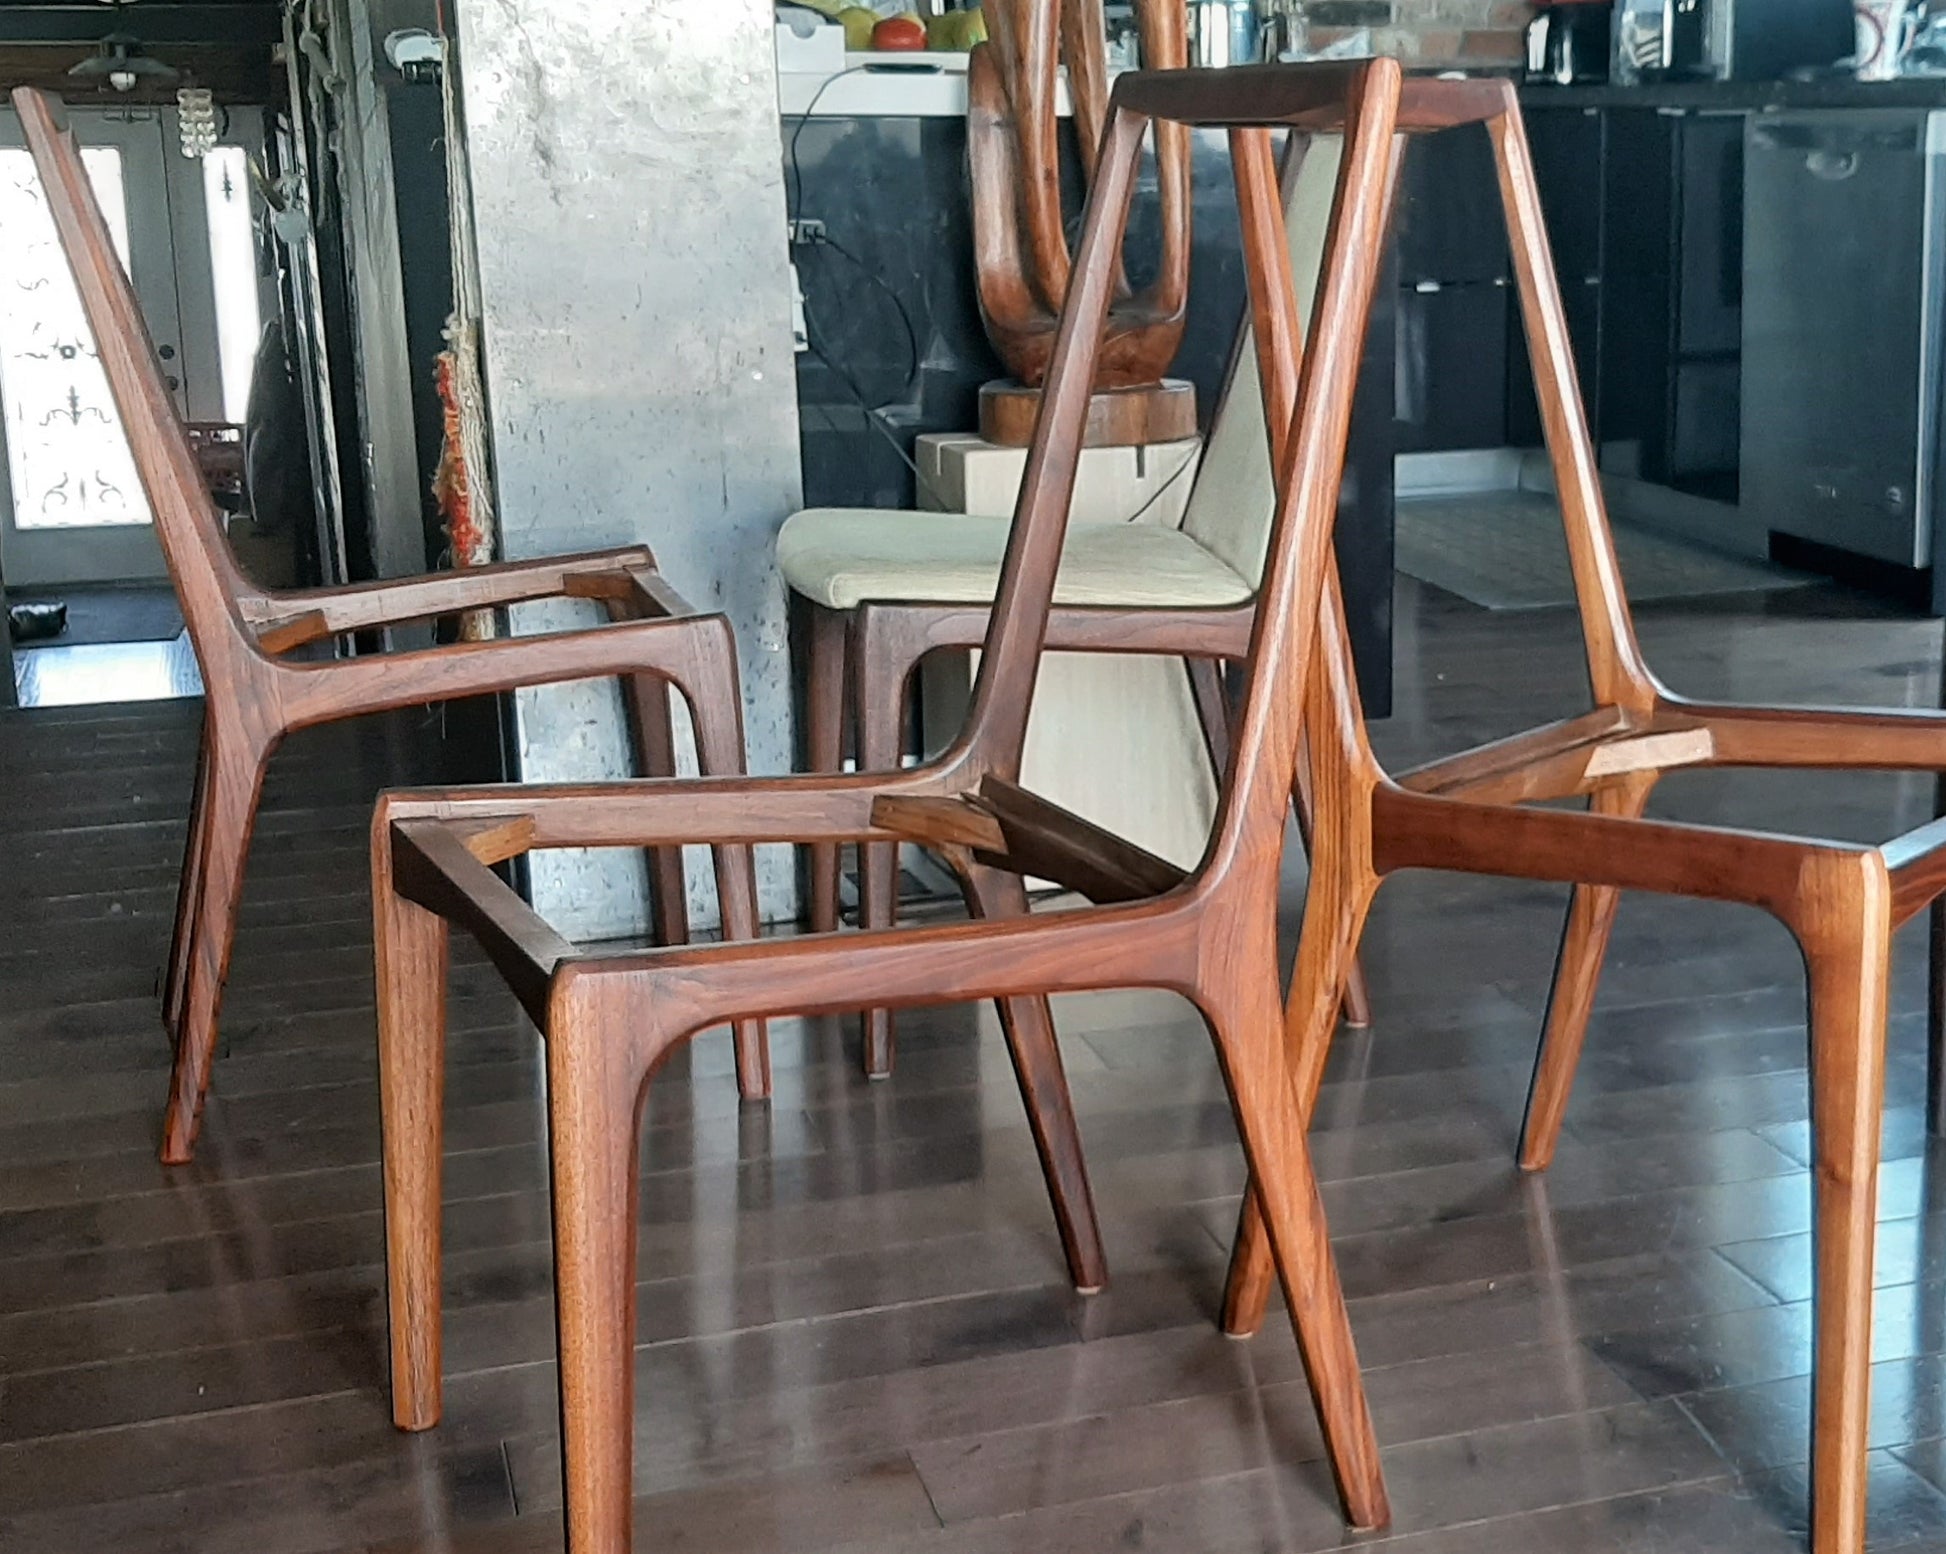 8 REFINISHED MCM walnut sculptural chairs PERFECT, ready for new upholstery, each chair $249 - Mid Century Modern Toronto